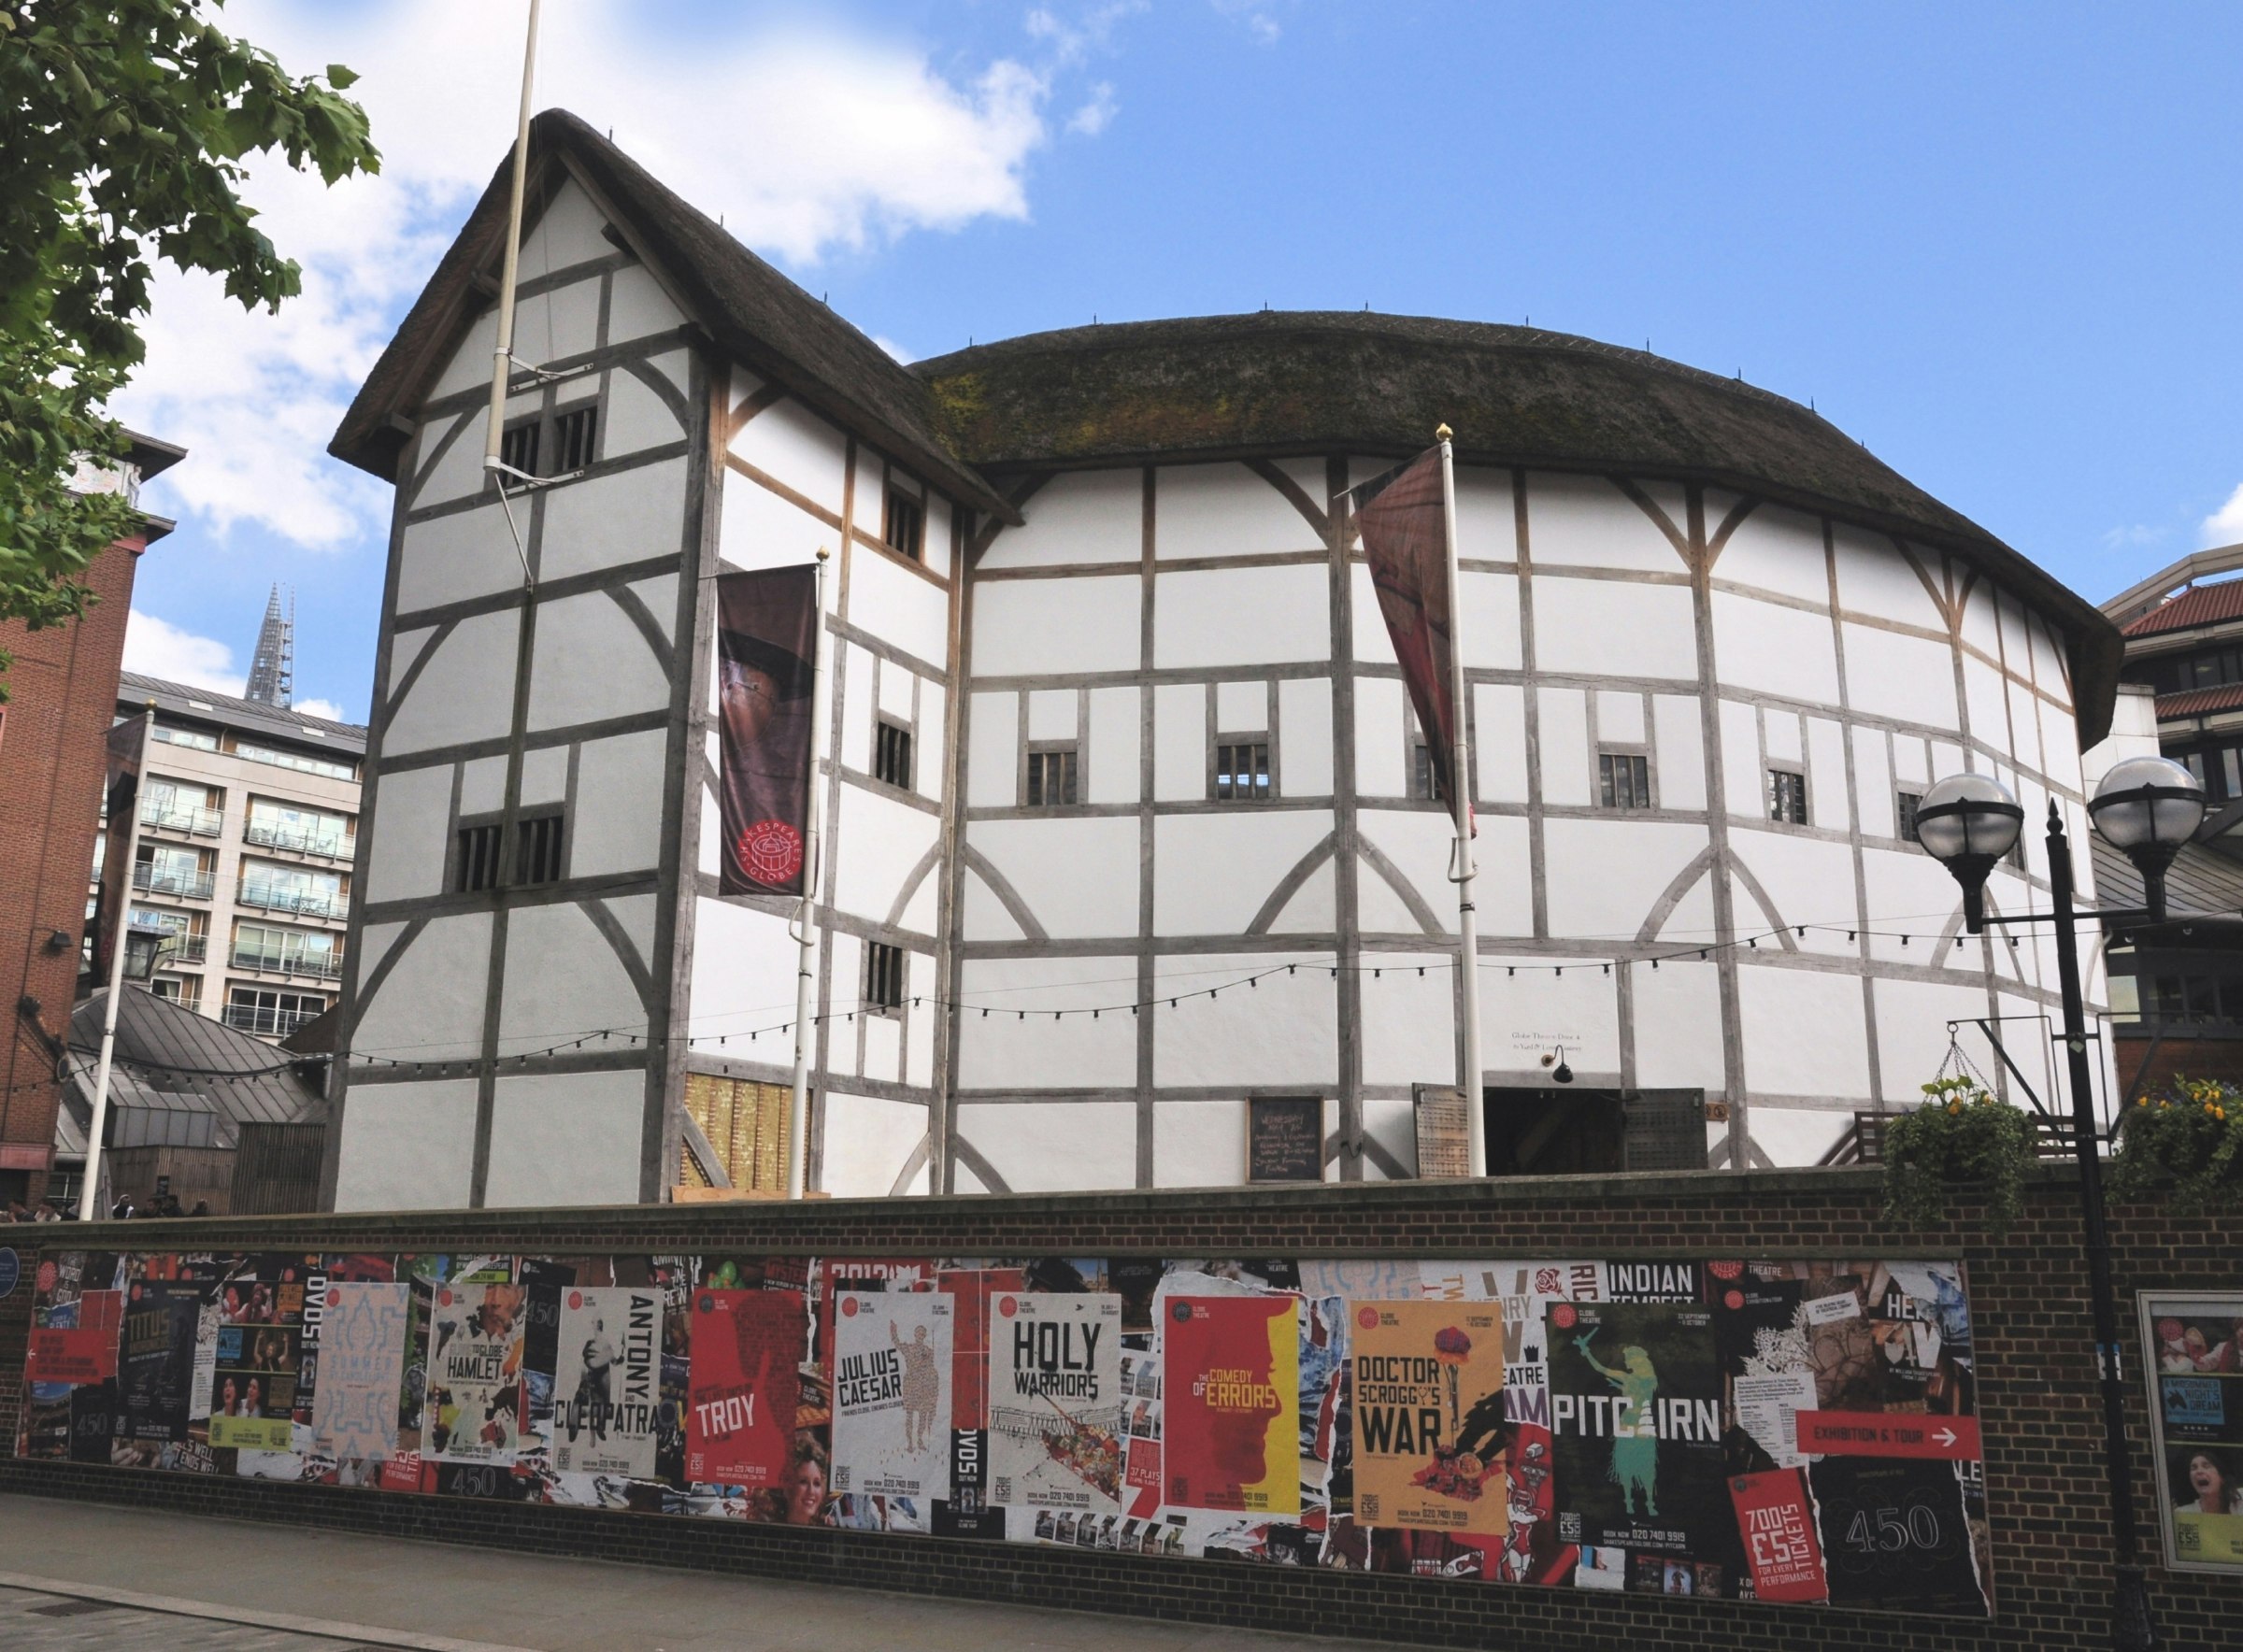 The exterior of Shakespeare's Globe Theatre in London, a reconstruction of the original with a thatched roof and exposed wooden beams bathed in sunlight